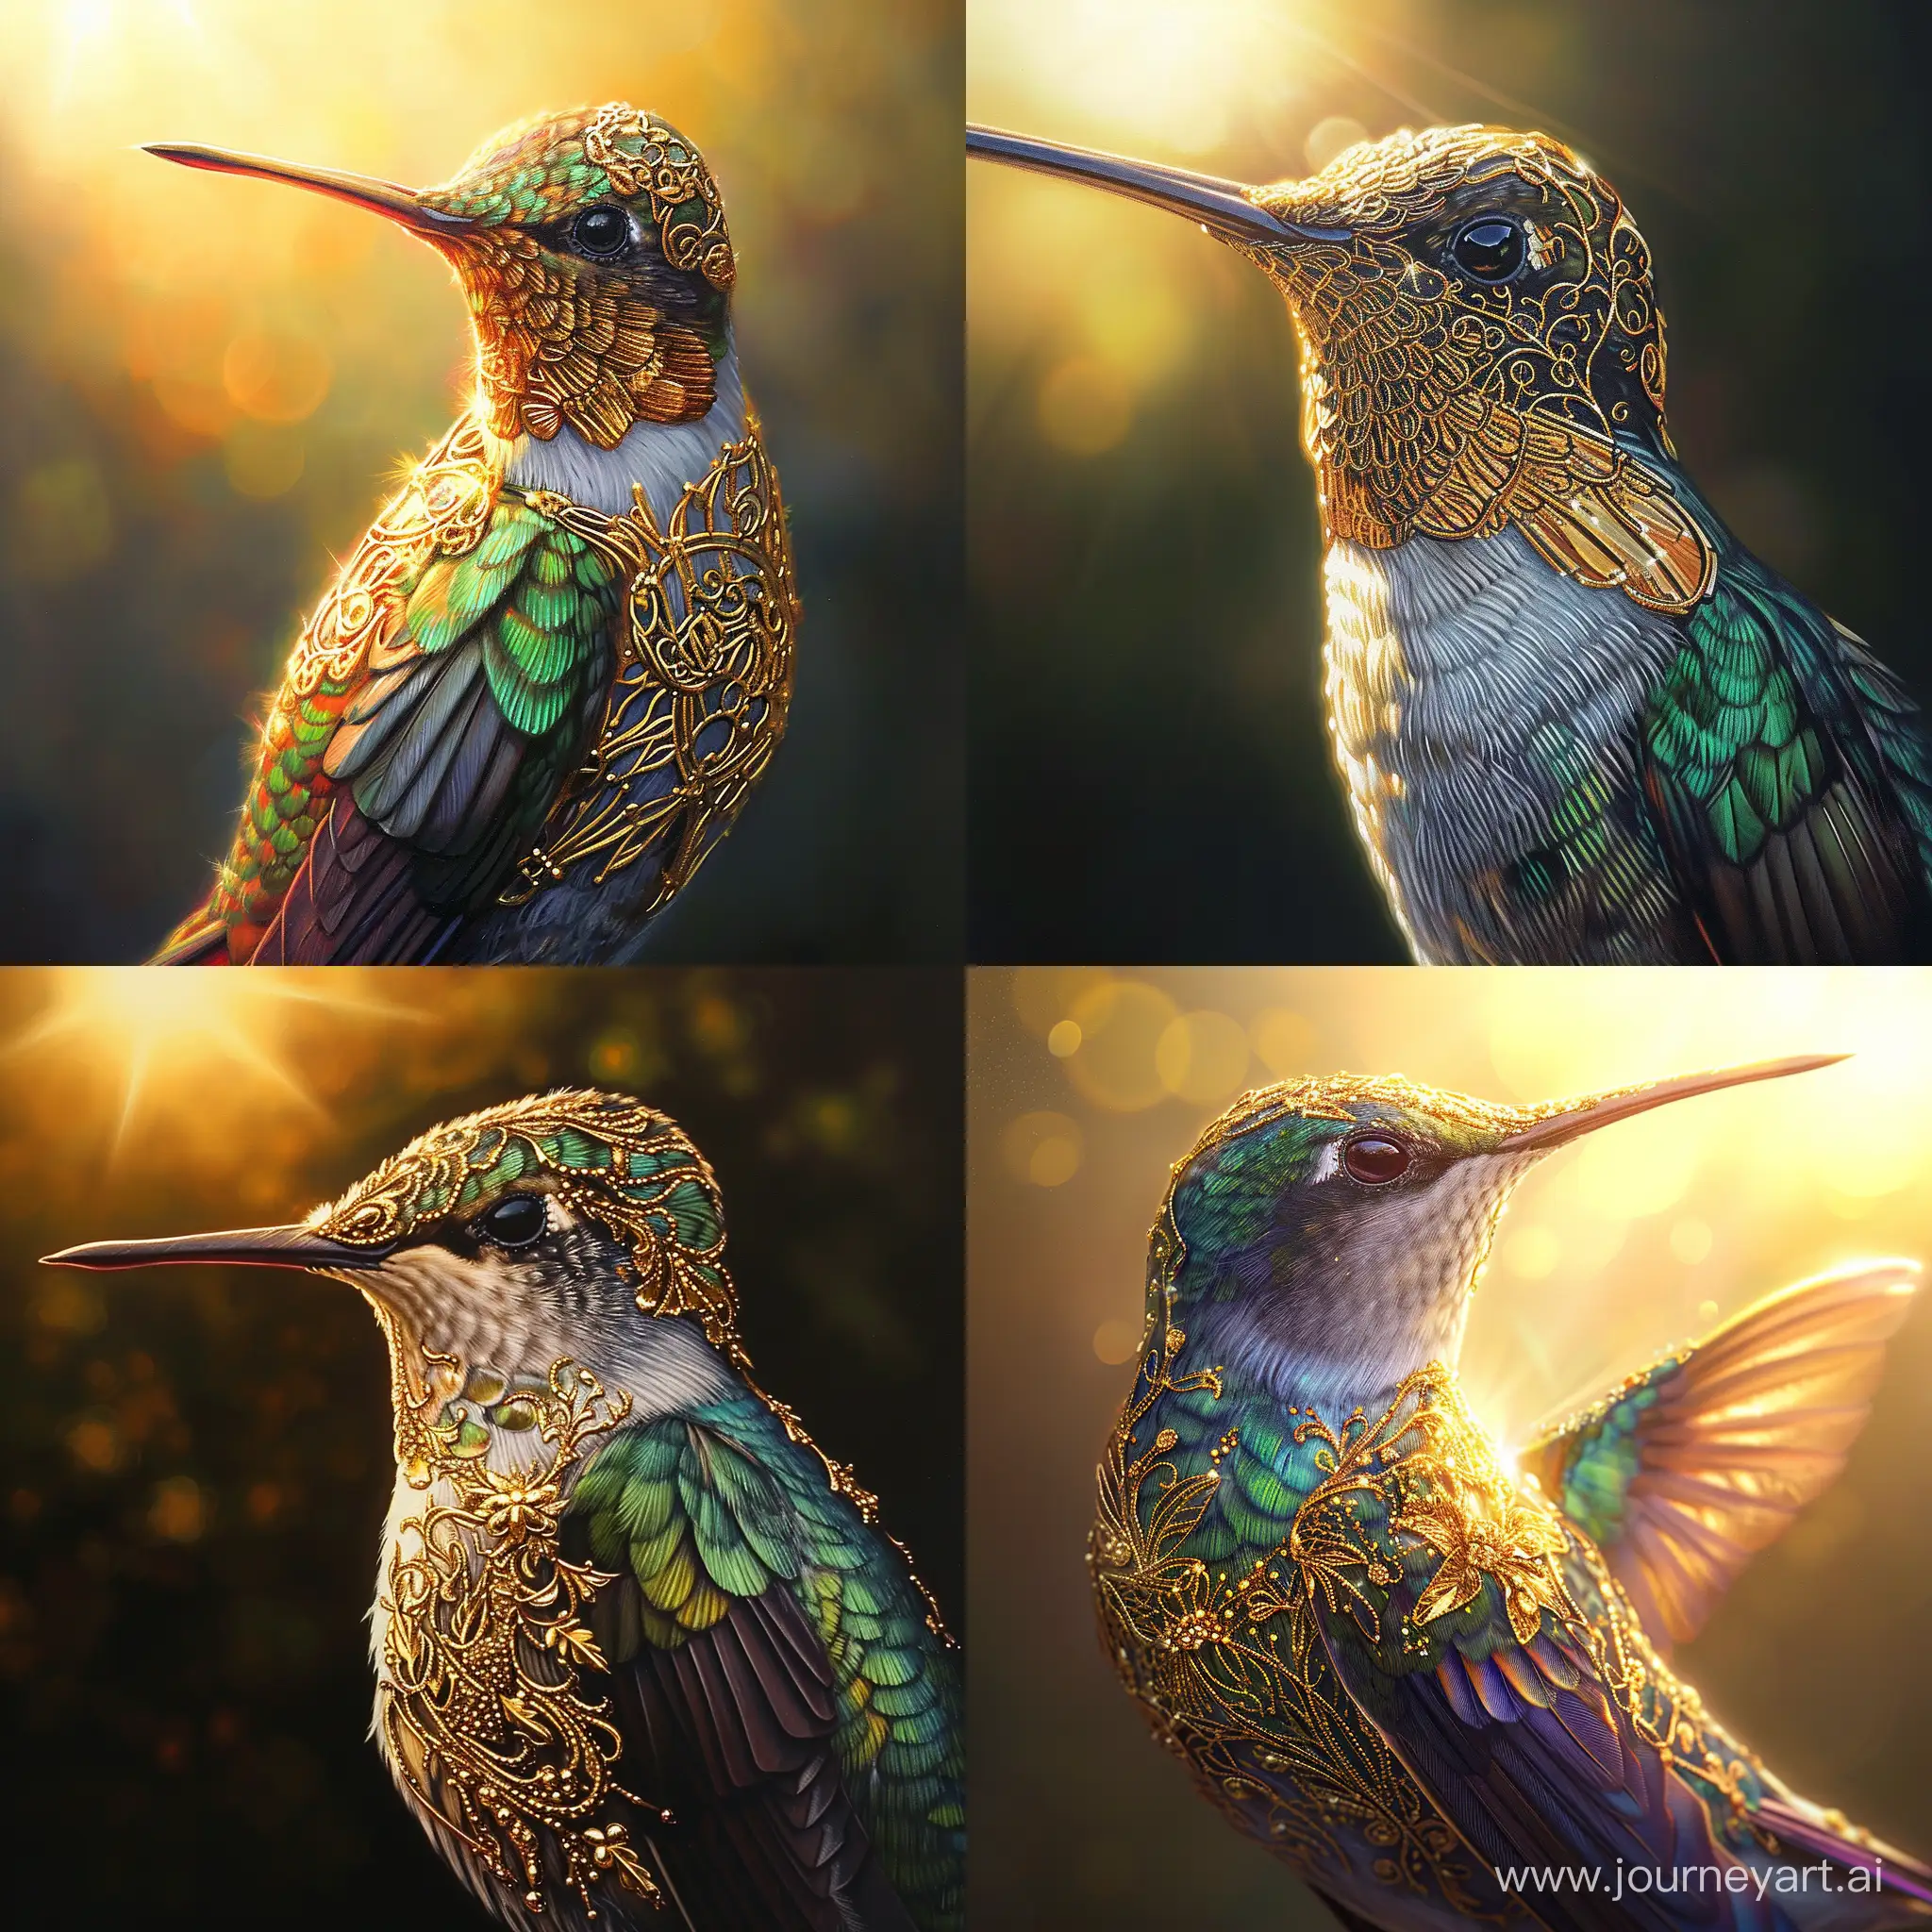 close up artwork of a hummingbird, with intricate gold filigree covering body enhancing its royal appearance, vibrant colours, highly detailed, serene atmosphere. Soft sunlight gracefully illuminates the subject's body and feathers, casting a dreamlike glow.